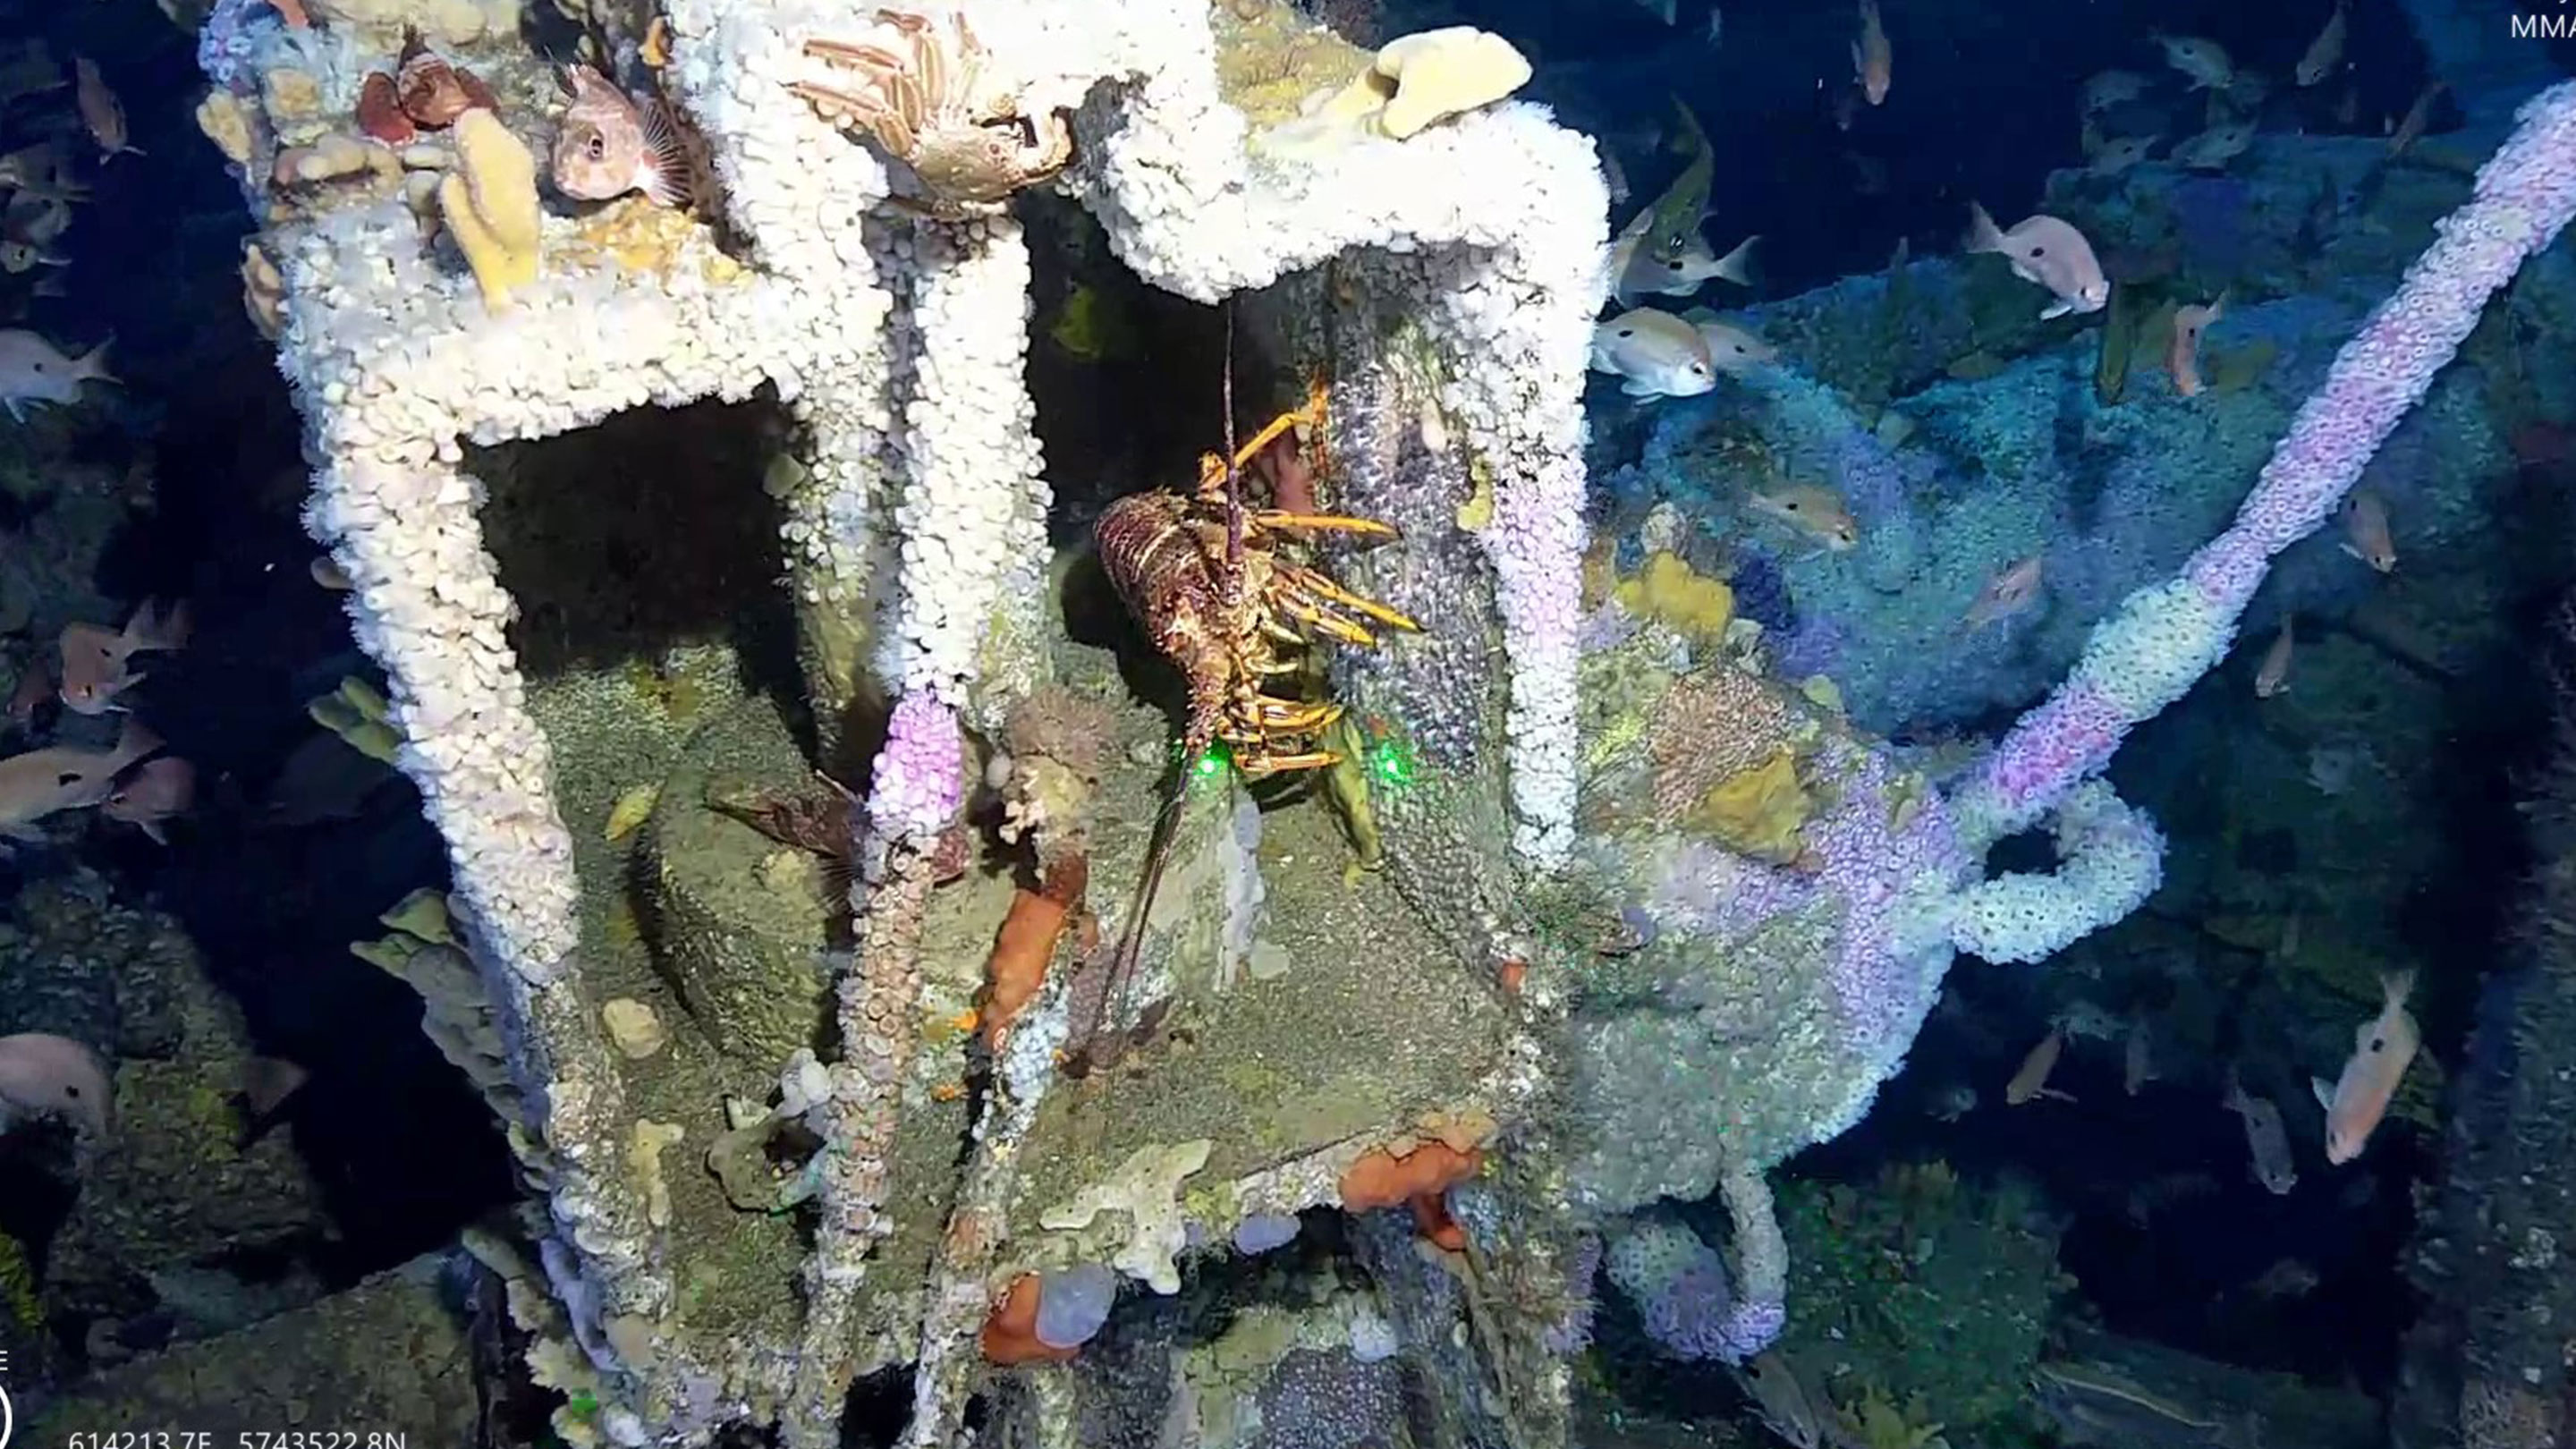 Image A Southern Rock Lobster at 56.7 metres deep under the platform Cobia.